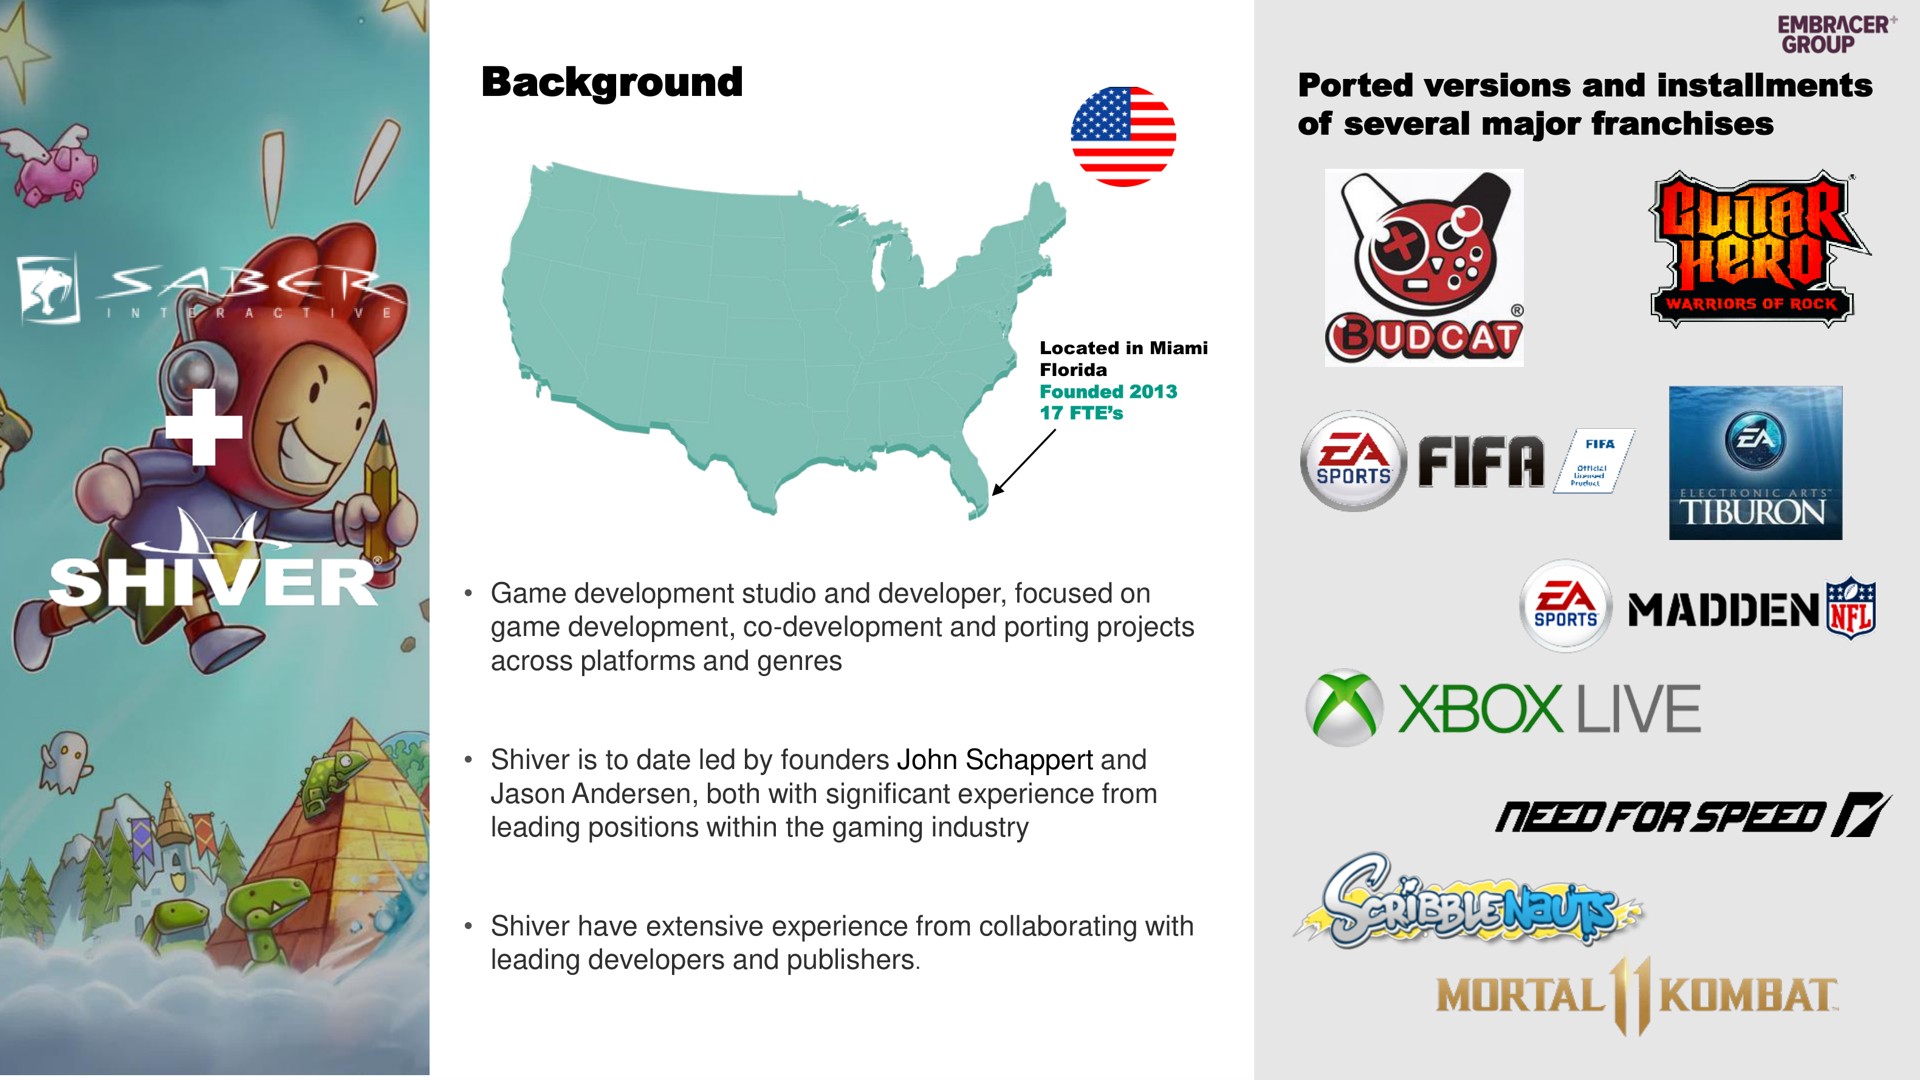 background of several major franchises game development development and porting projects live game development studio and developer focused on sports madden | Embracer Group